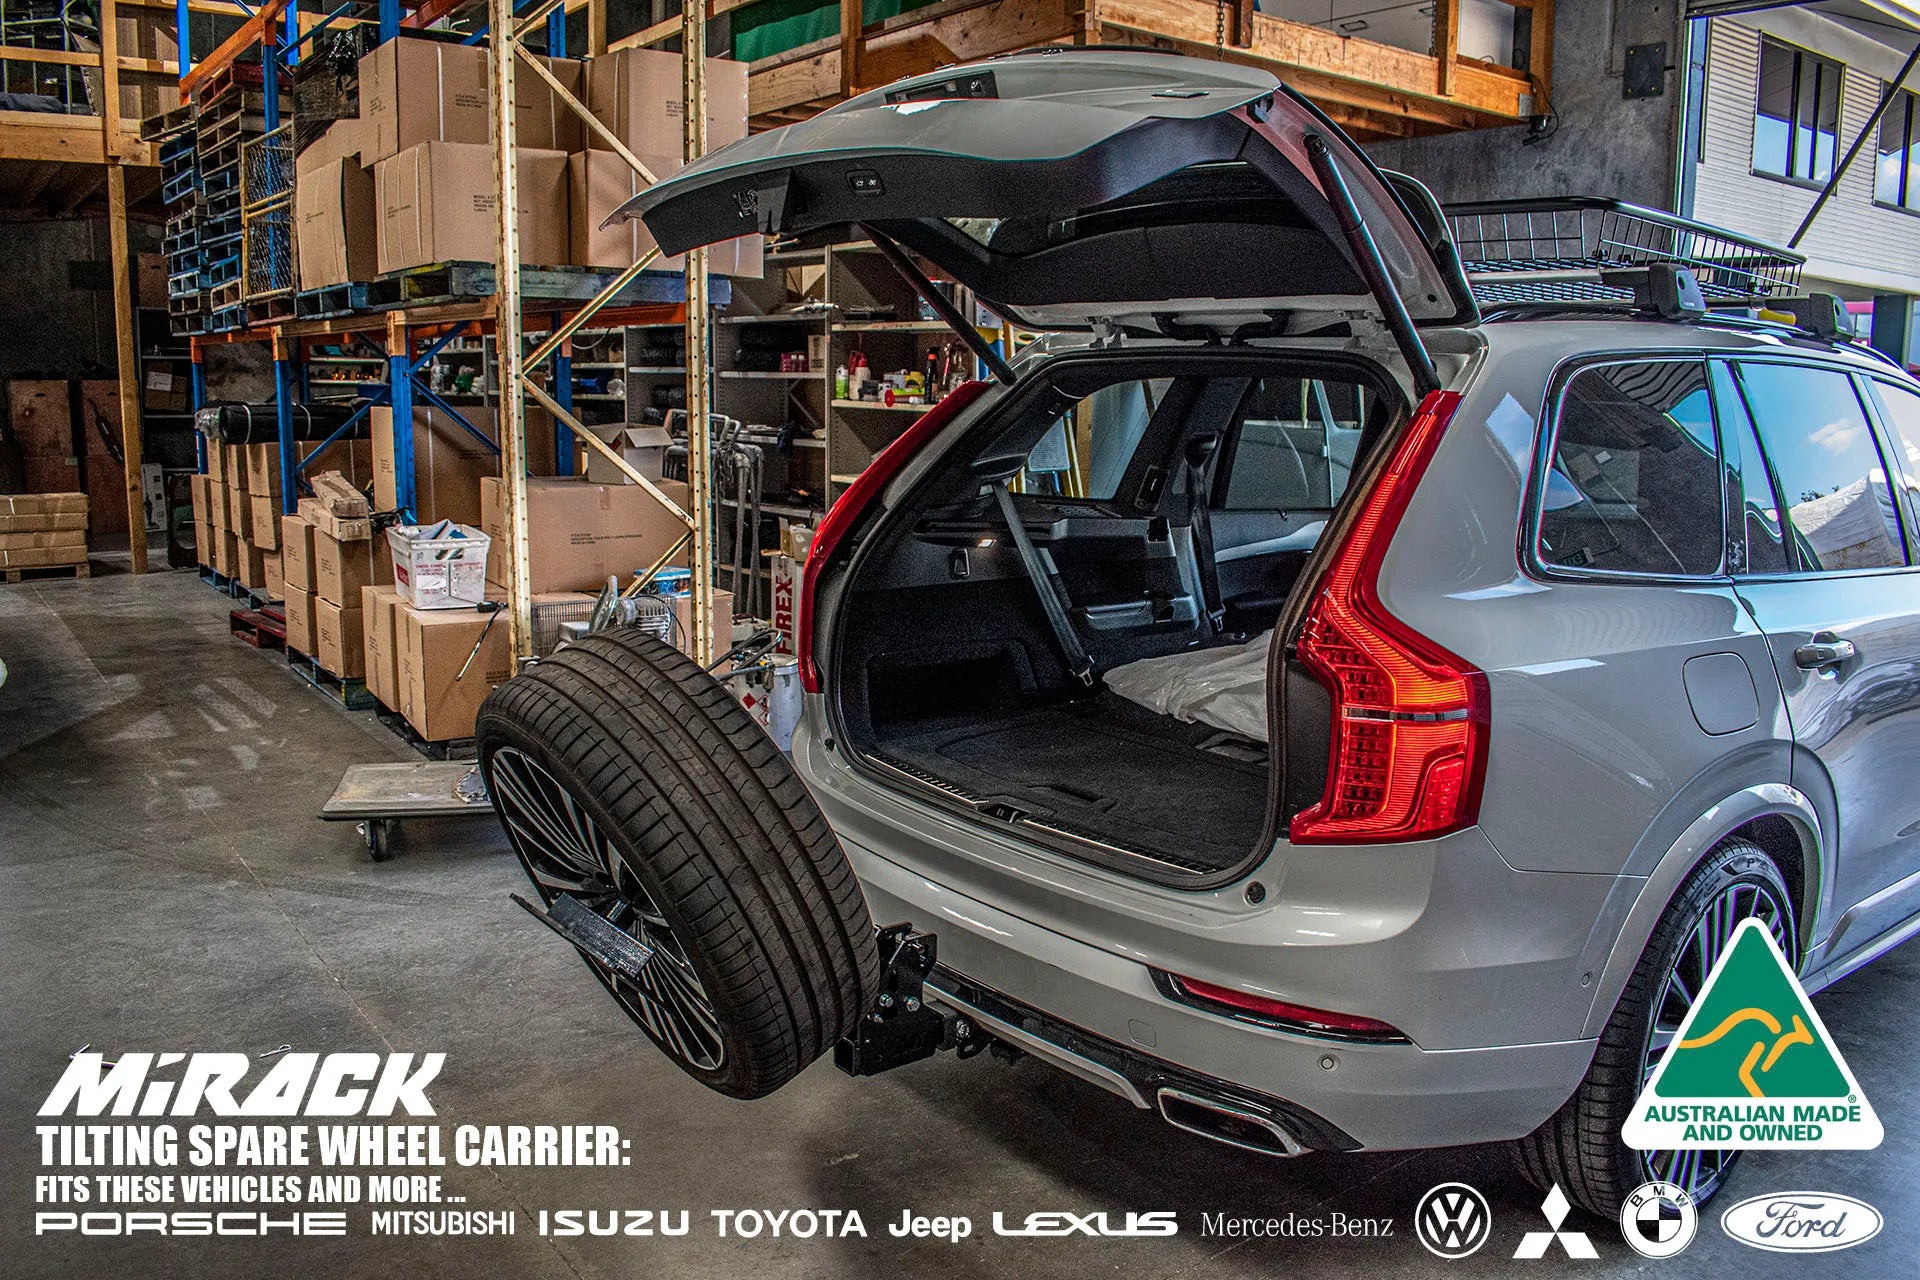 Conquer any terrain with a tilting spare wheel carrier for your Volvo SUV (tow hitch mount).